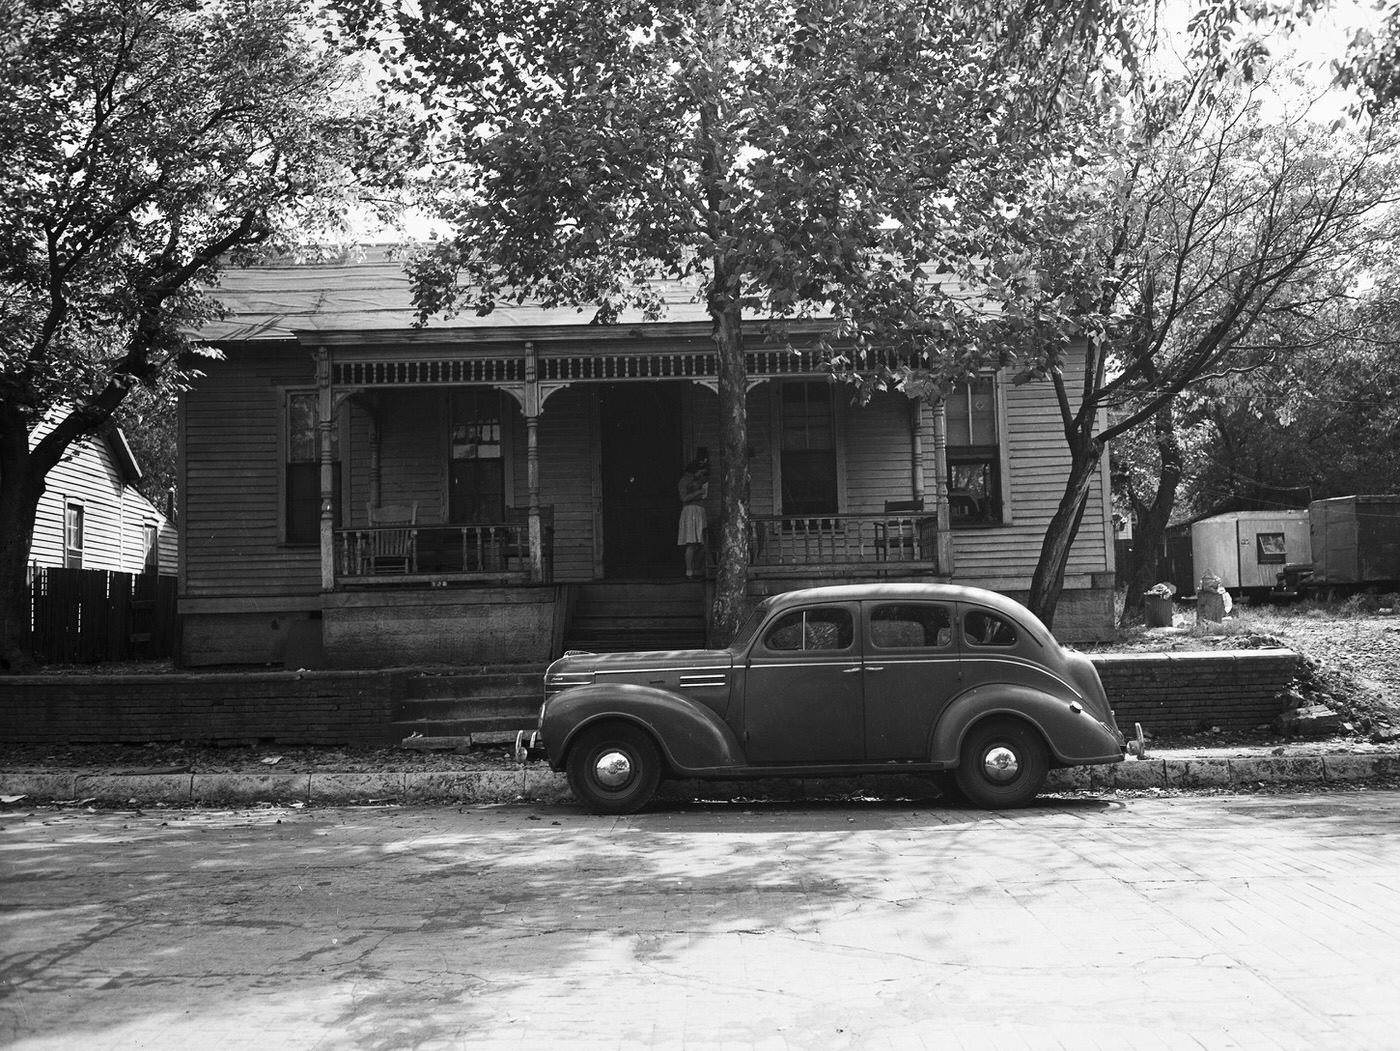 Exterior views of the cottage at 605 West First Street, Fort Worth, Texas owned by Mr. and Mrs. E. H. Keller, 1944